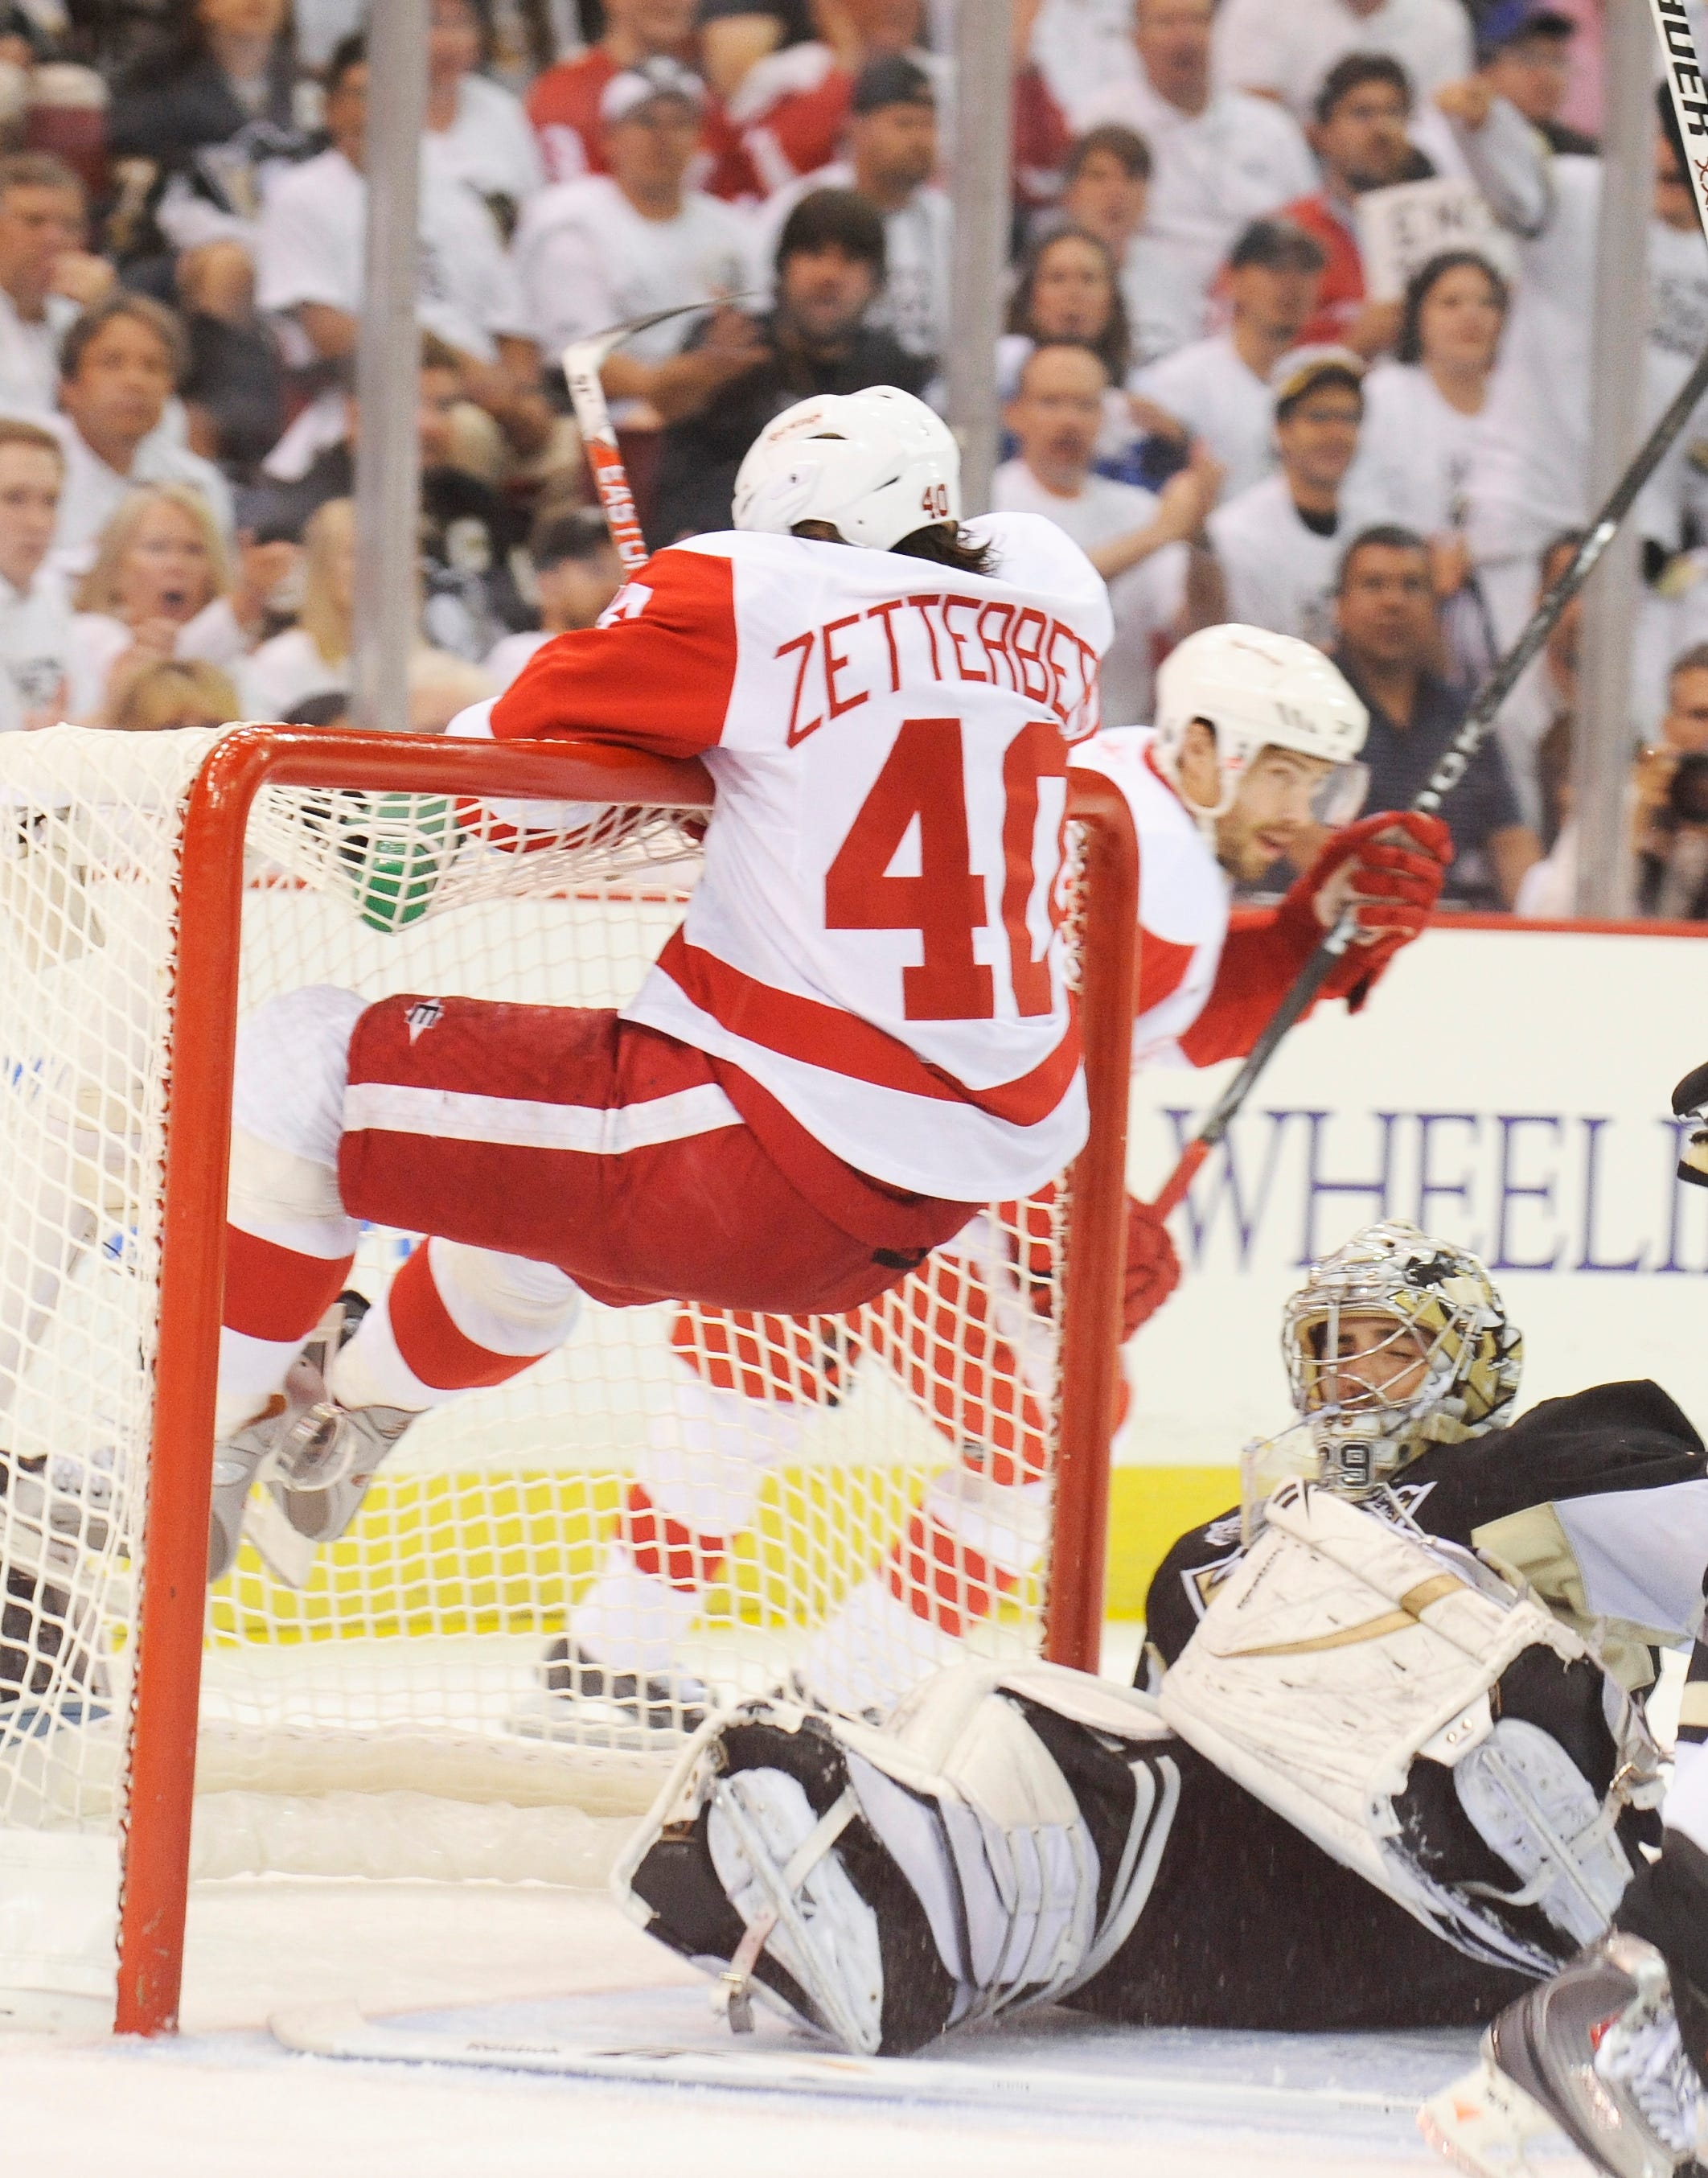 Red Wings center Henrik Zetterberg hangs from the crossbar after running into Pittsburgh Penguins goalie Marc-Andre Fleury. He was whistled for goaltender interference in Game 6 of the Stanley Cup Final in Pittsburgh on June 9, 2009.